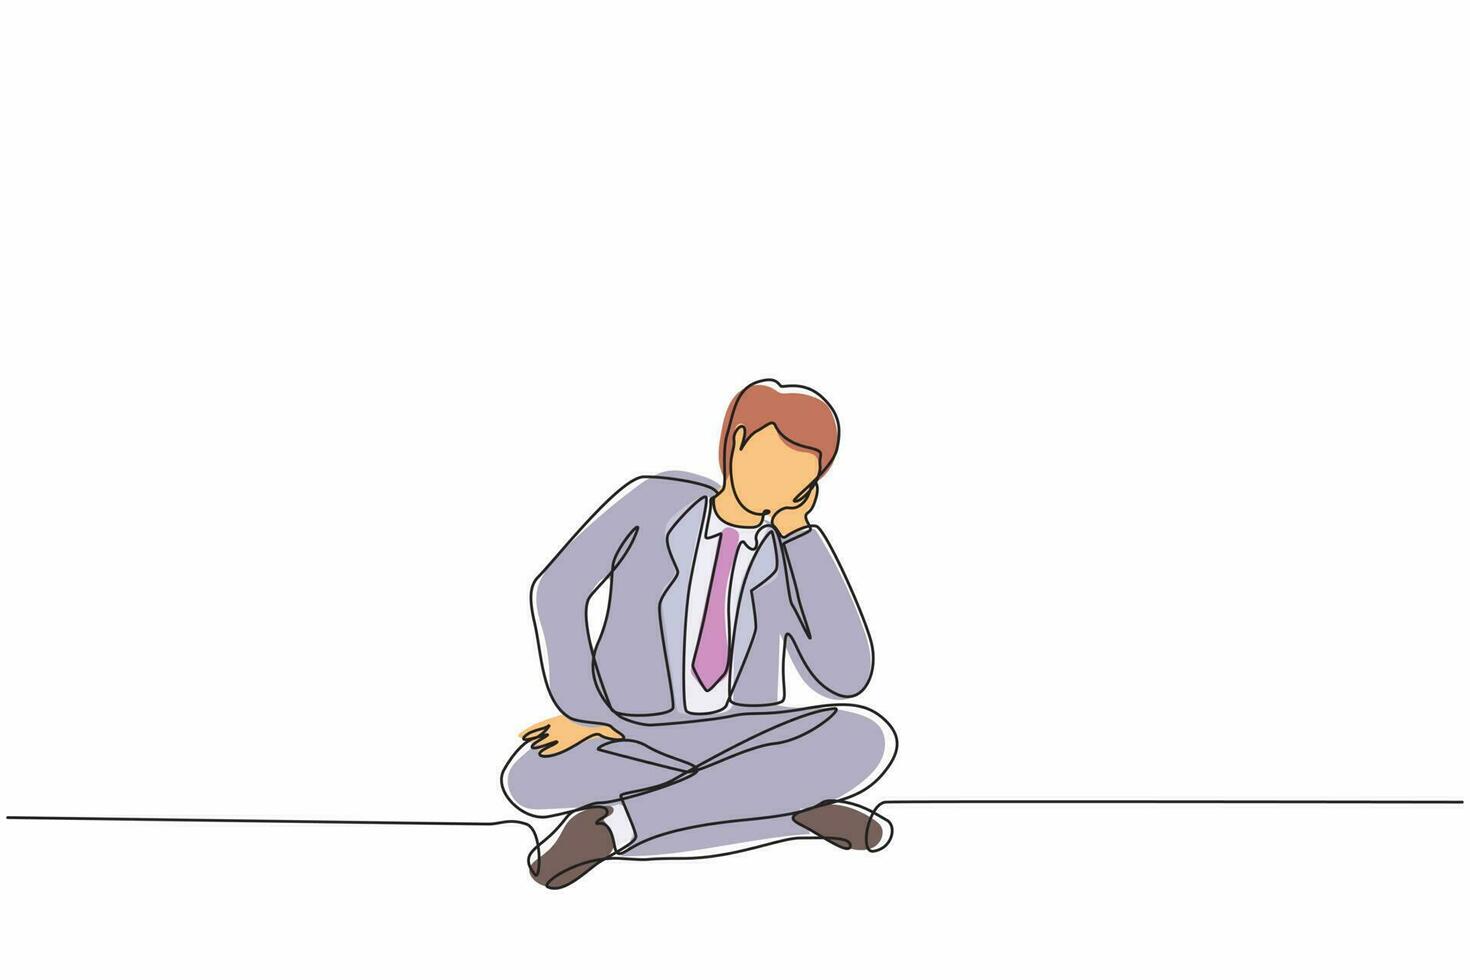 Continuous one line drawing businessman who is asking questions or is confused because he gets into problem. Running out of ideas, daydreaming, sad, depressed. Single line draw design vector graphic